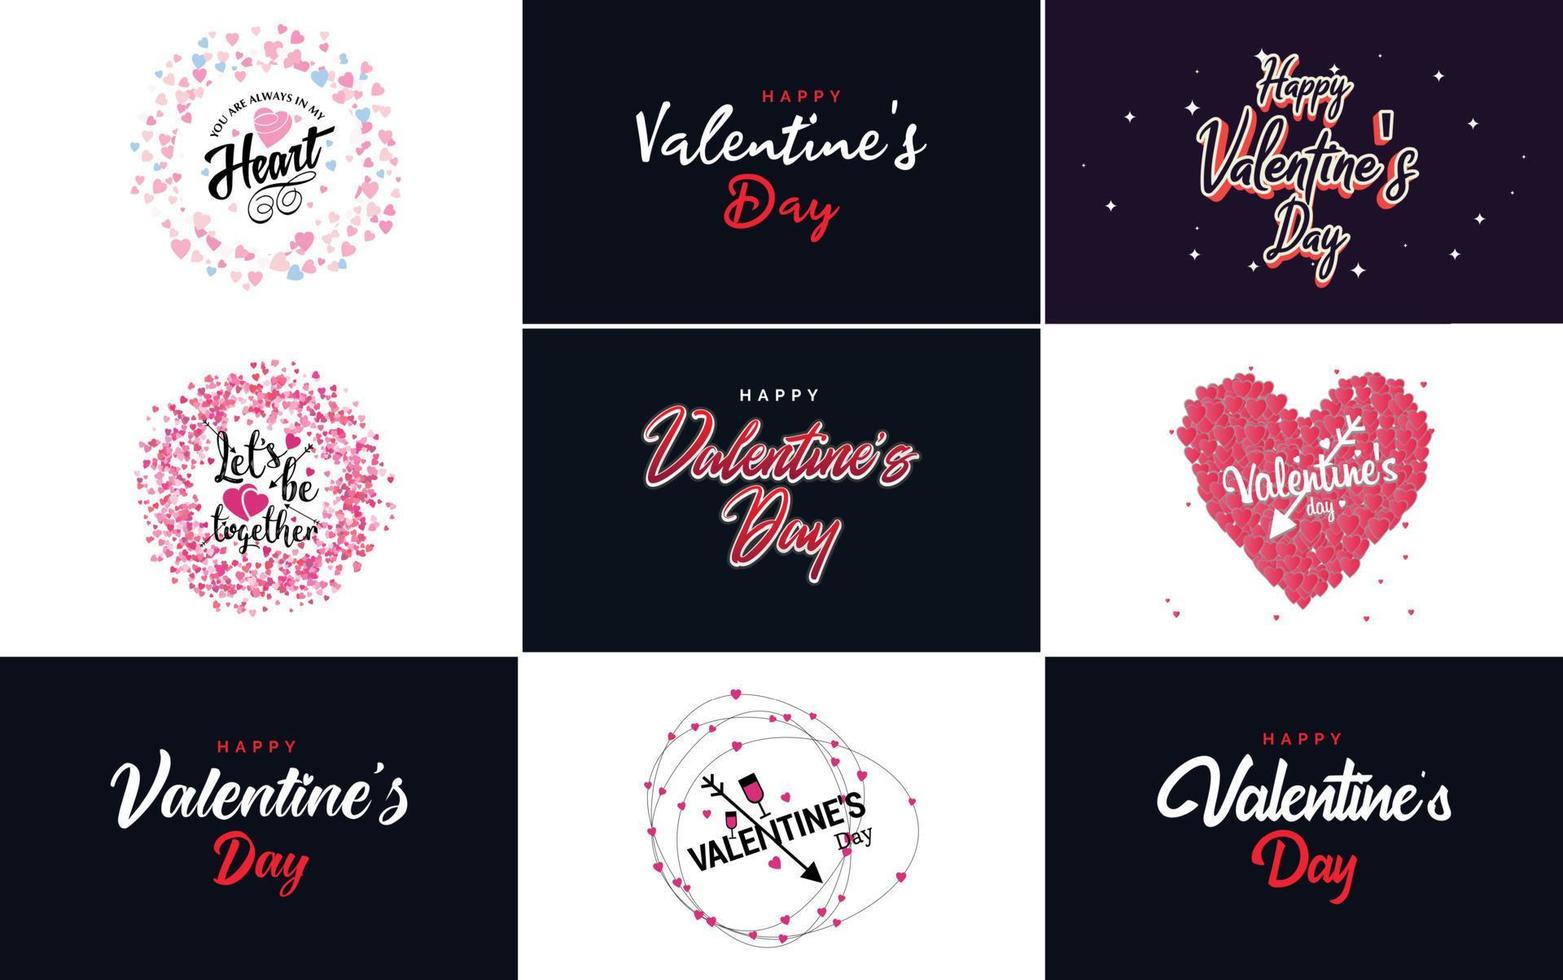 Love word art designs with a heart-shaped background vector